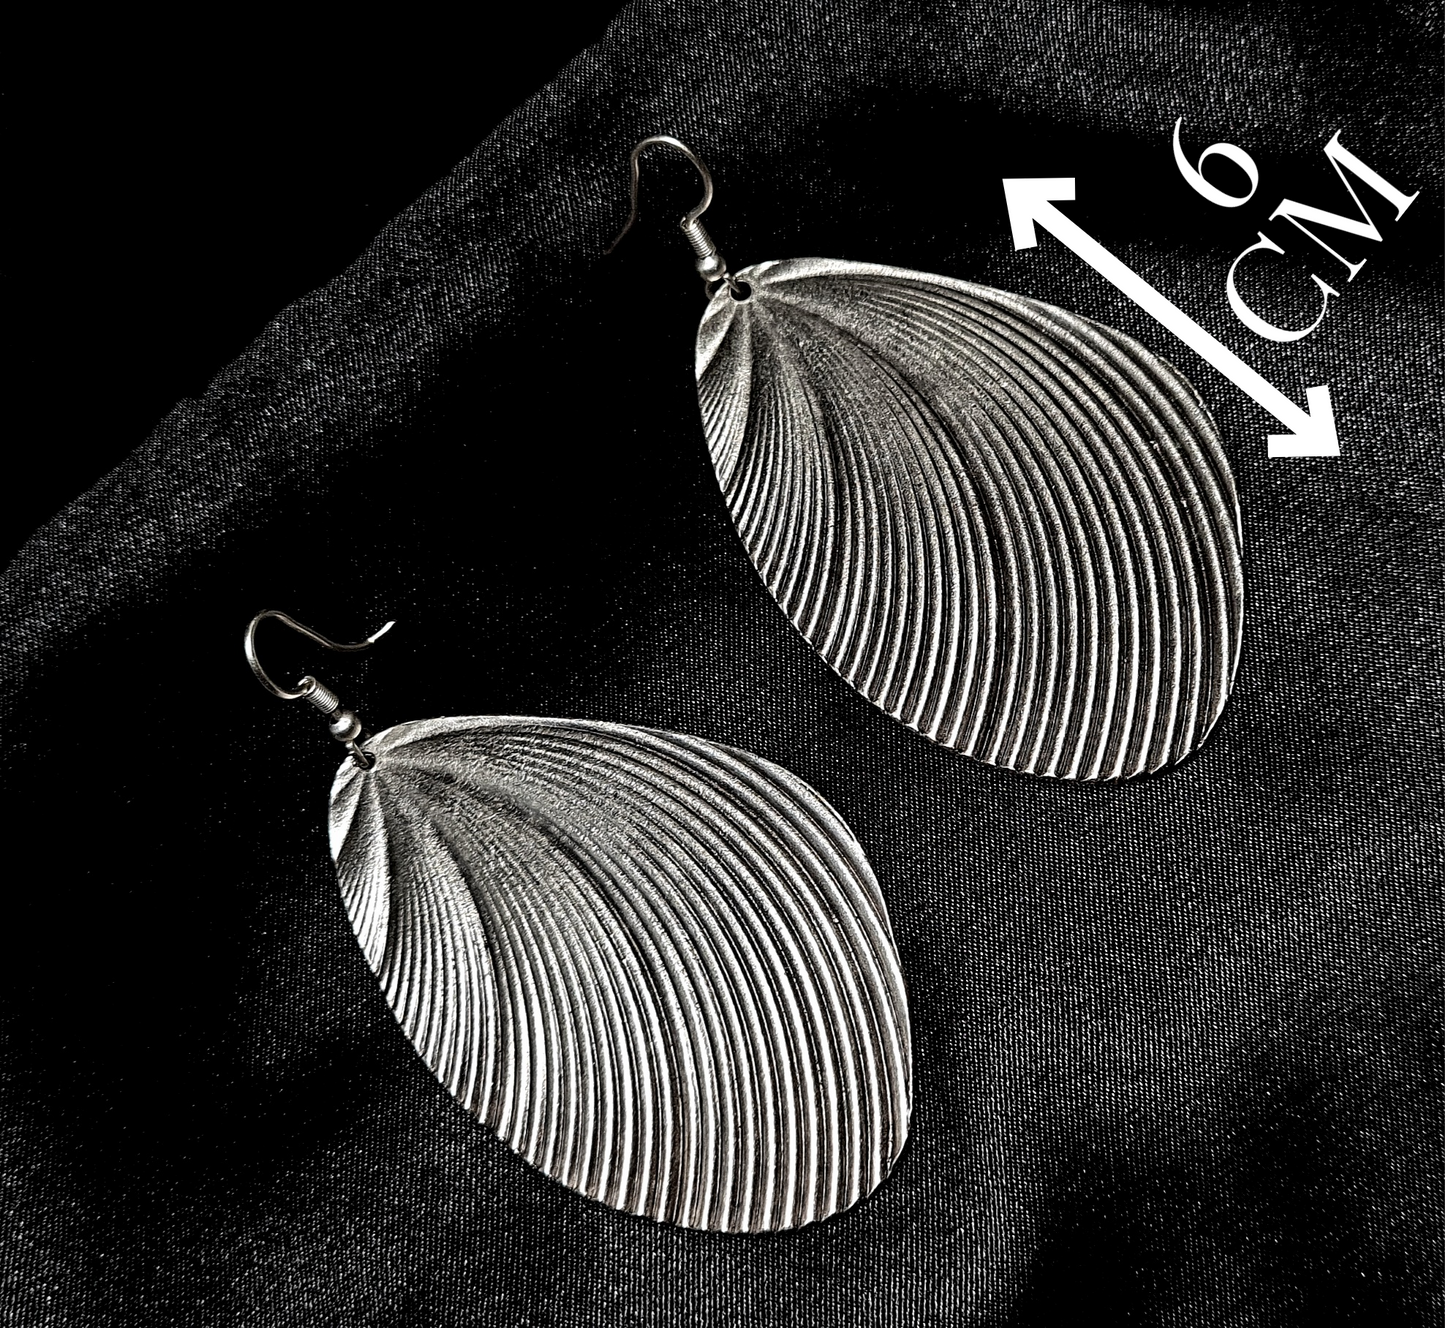 A pair of silver earrings with a shell design sitting on a black cloth. The earrings are small and delicate, and they have a shiny finish. The shell design is in the shape of a seashell, and it has a textured appearance